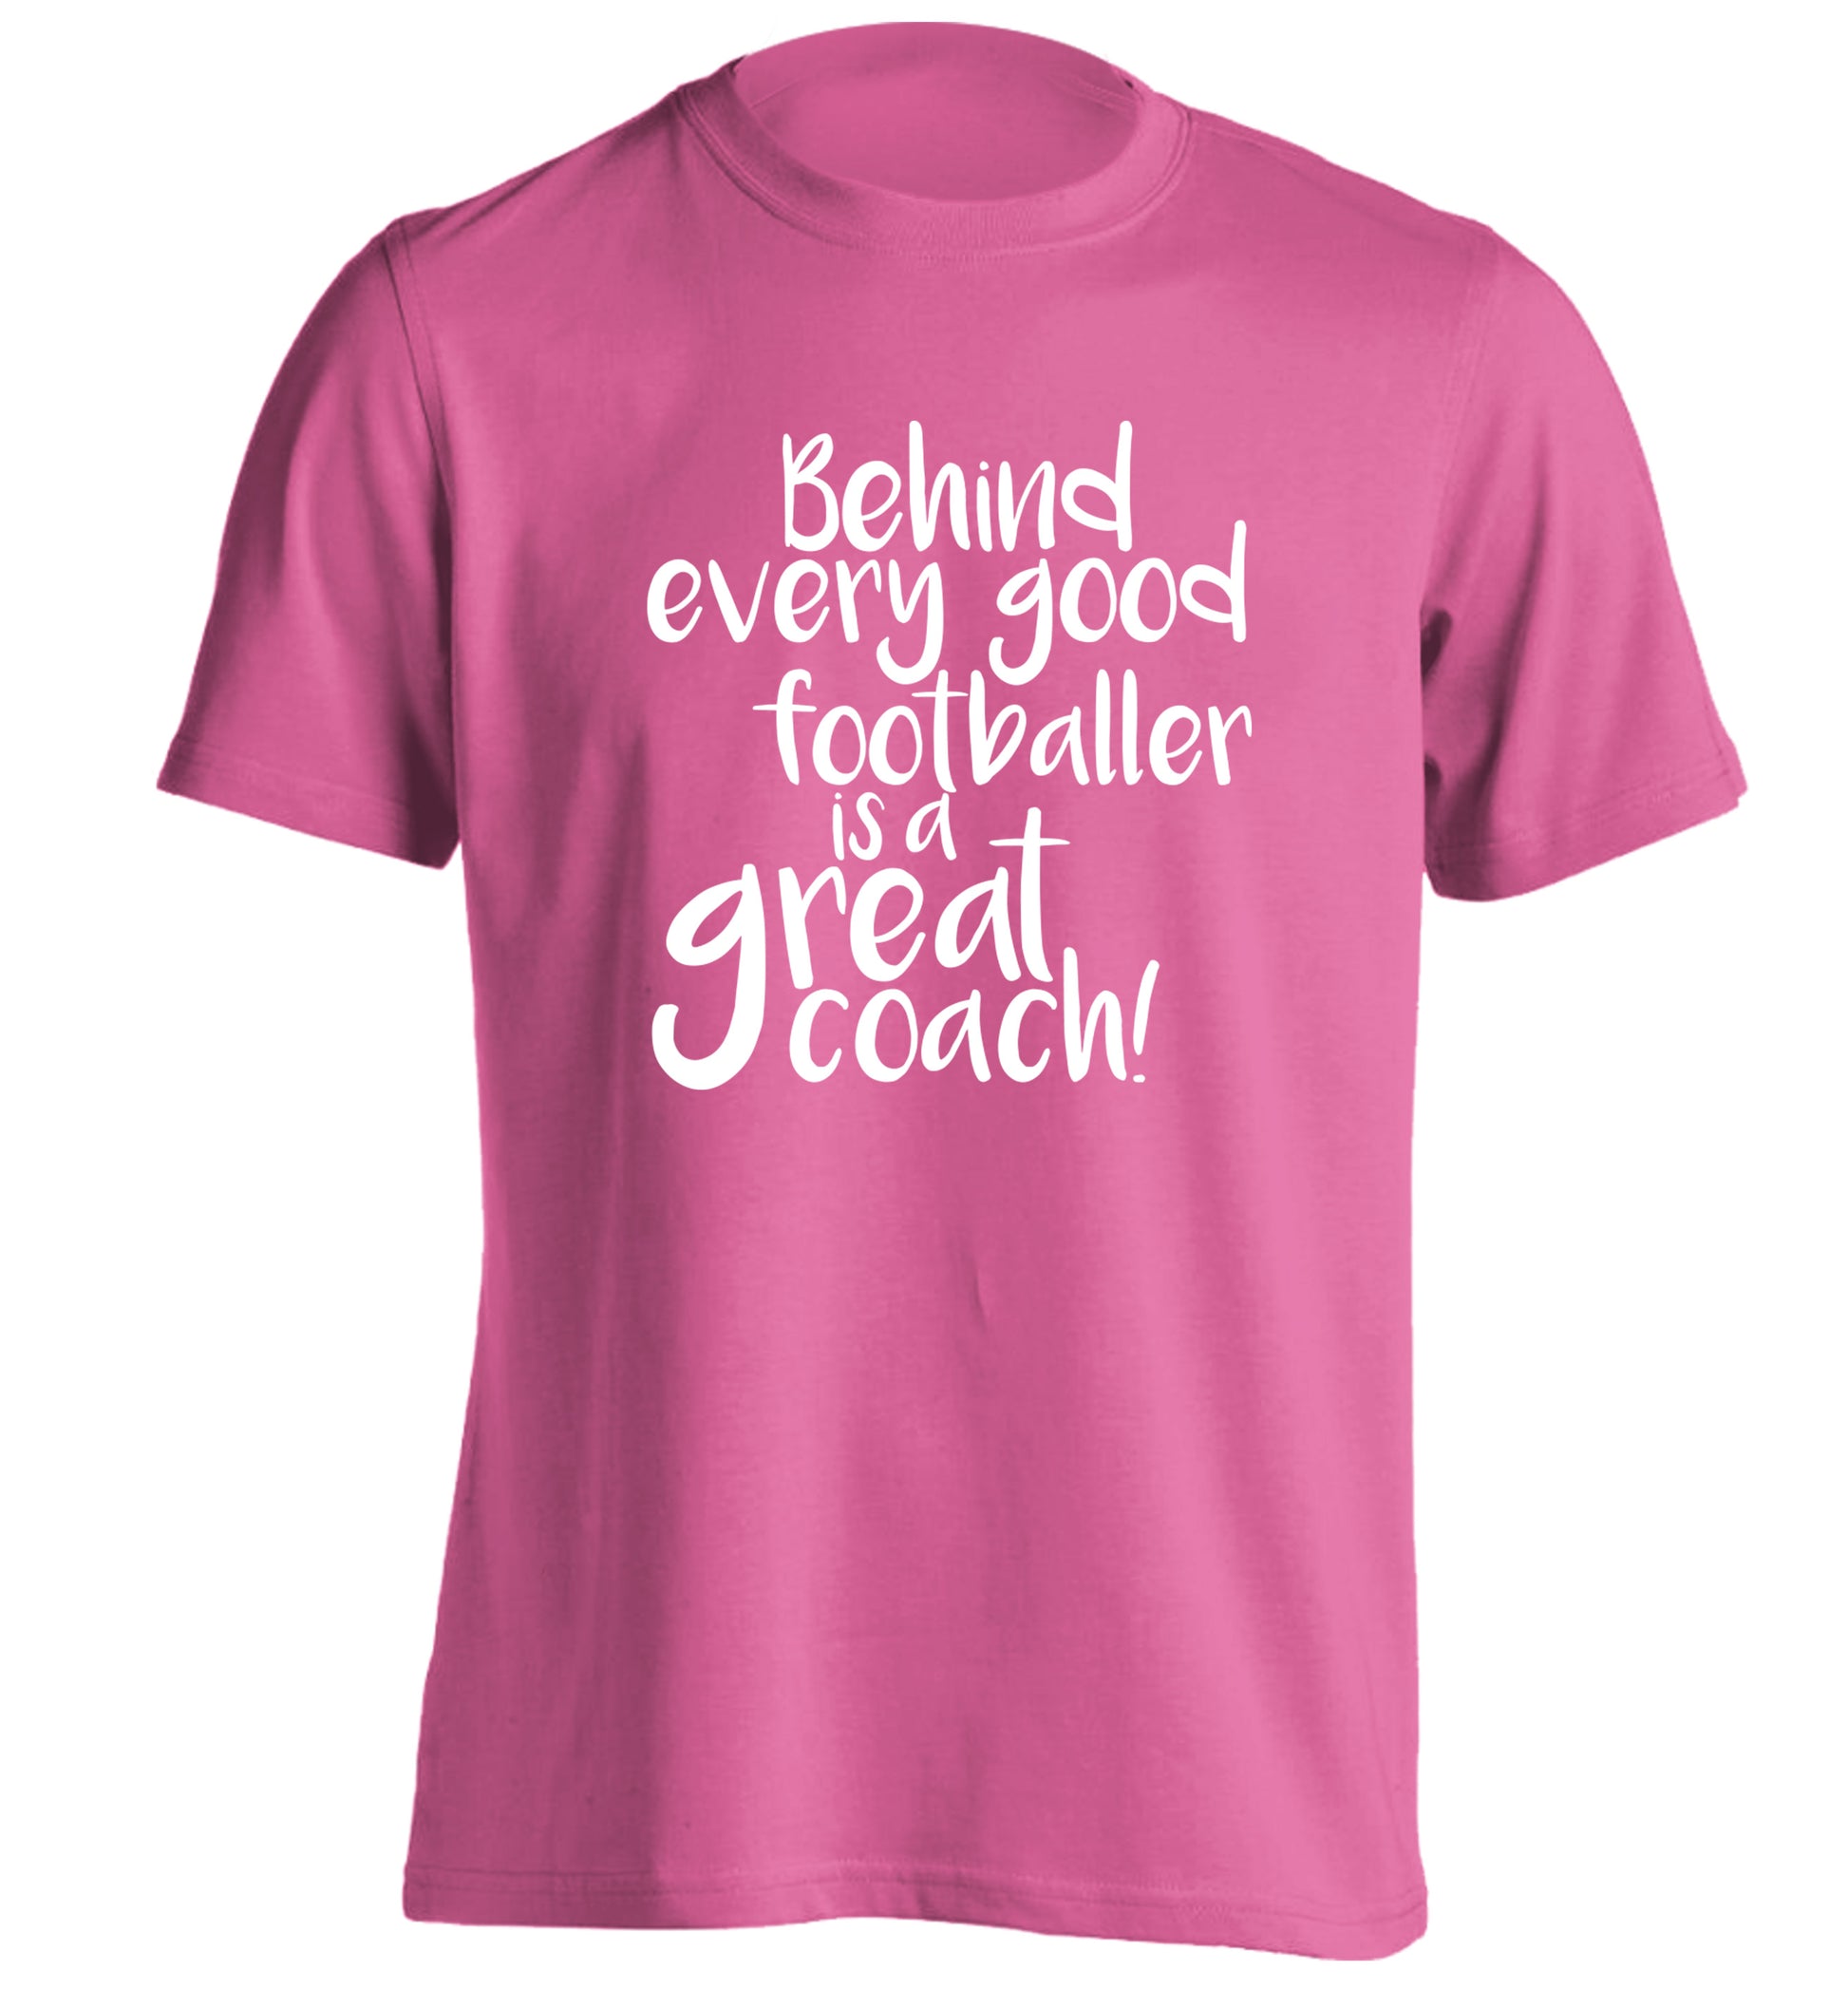 Behind every good footballer is a great coach! adults unisexpink Tshirt 2XL